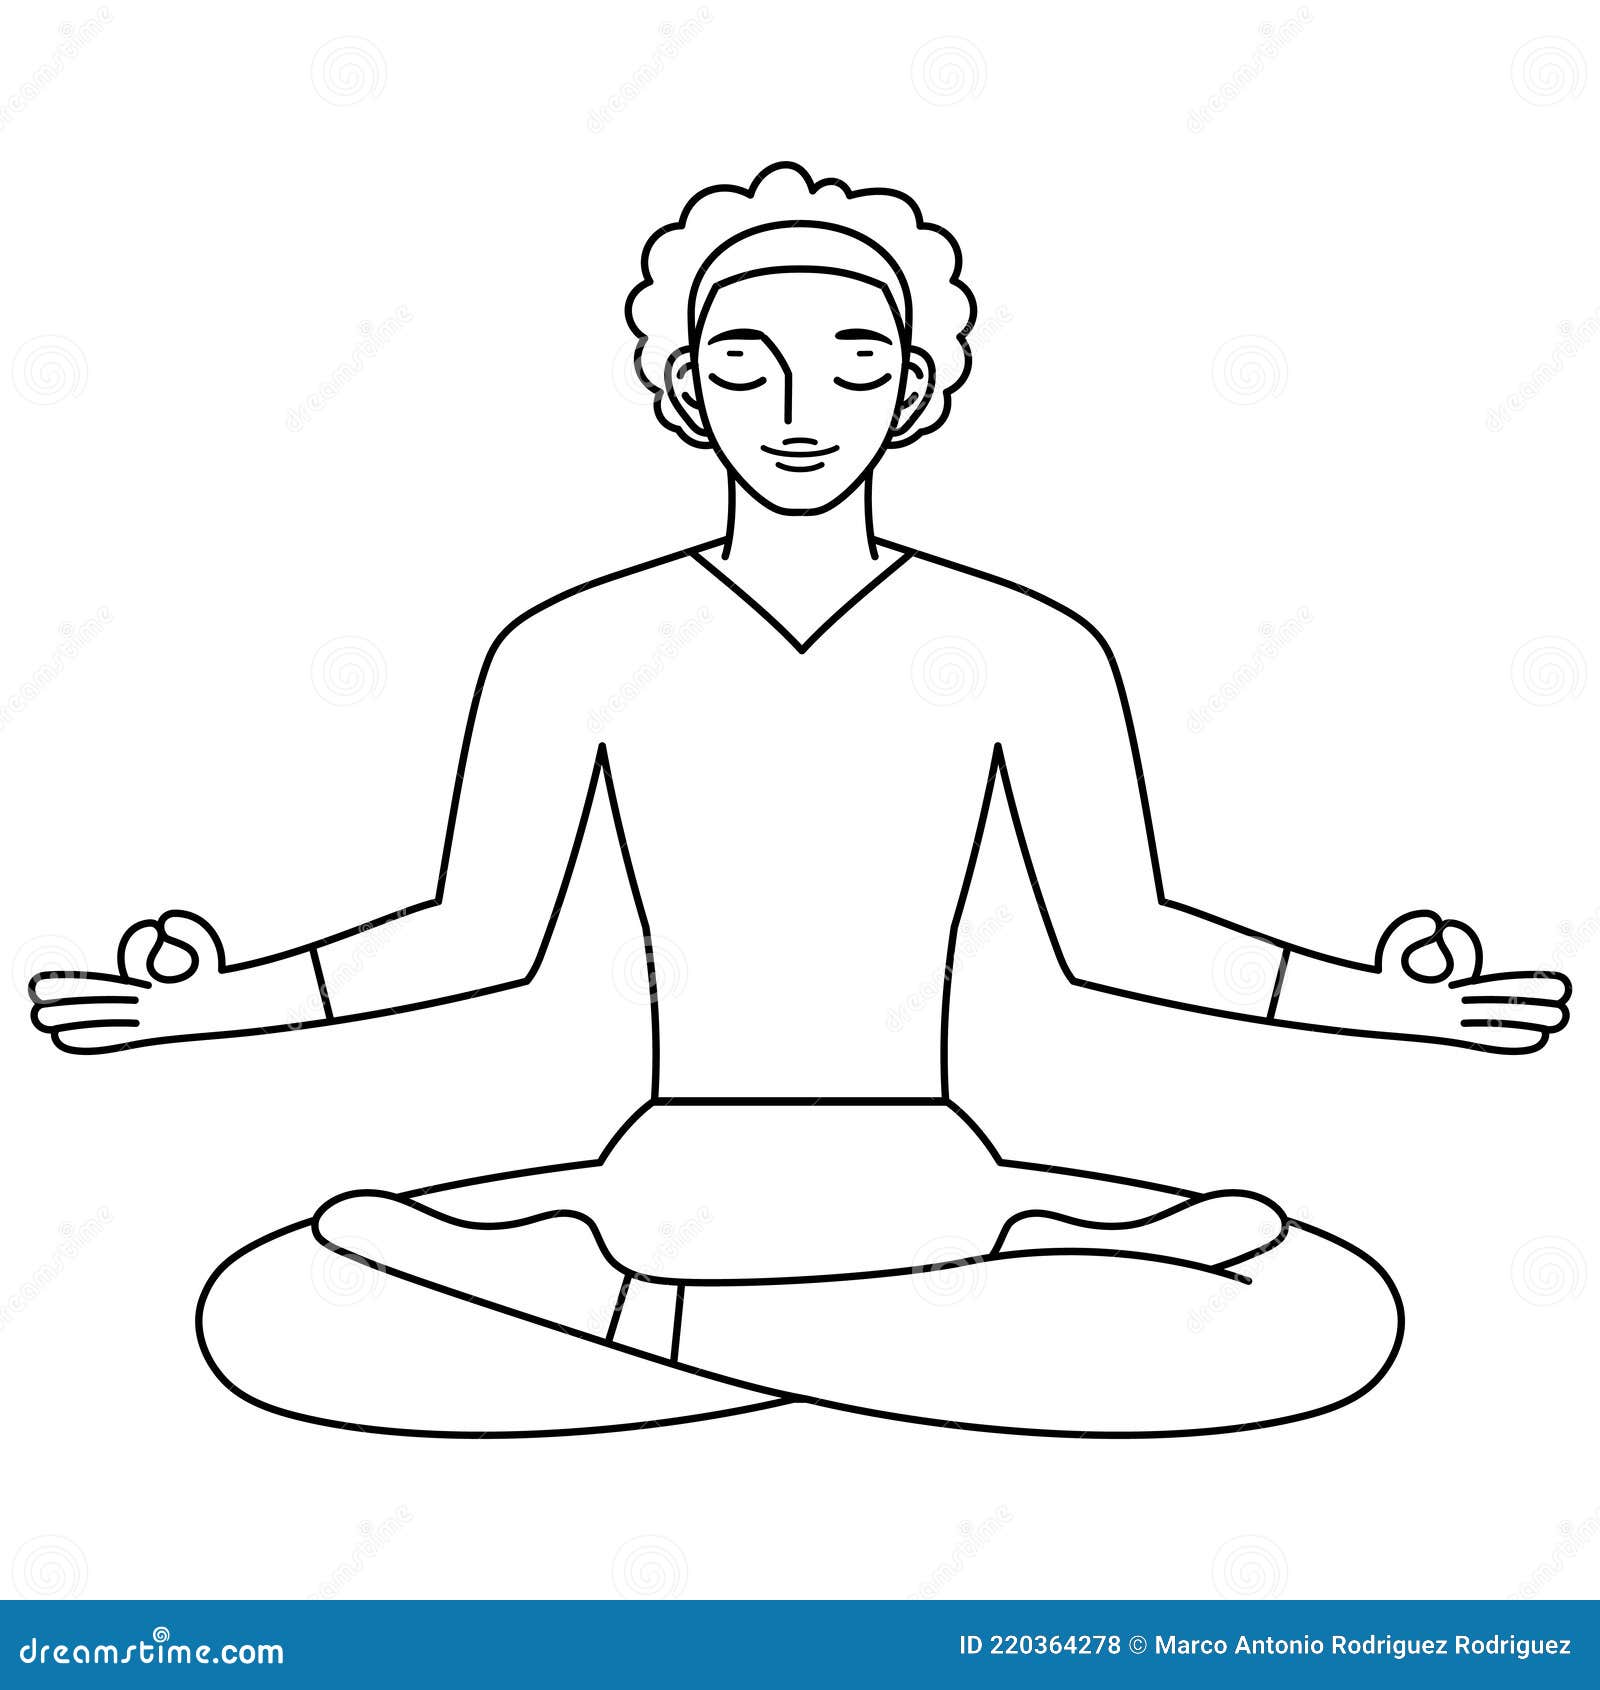 Isolated Outline of Man Meditating Healthy Lifestyle Stock Vector ...